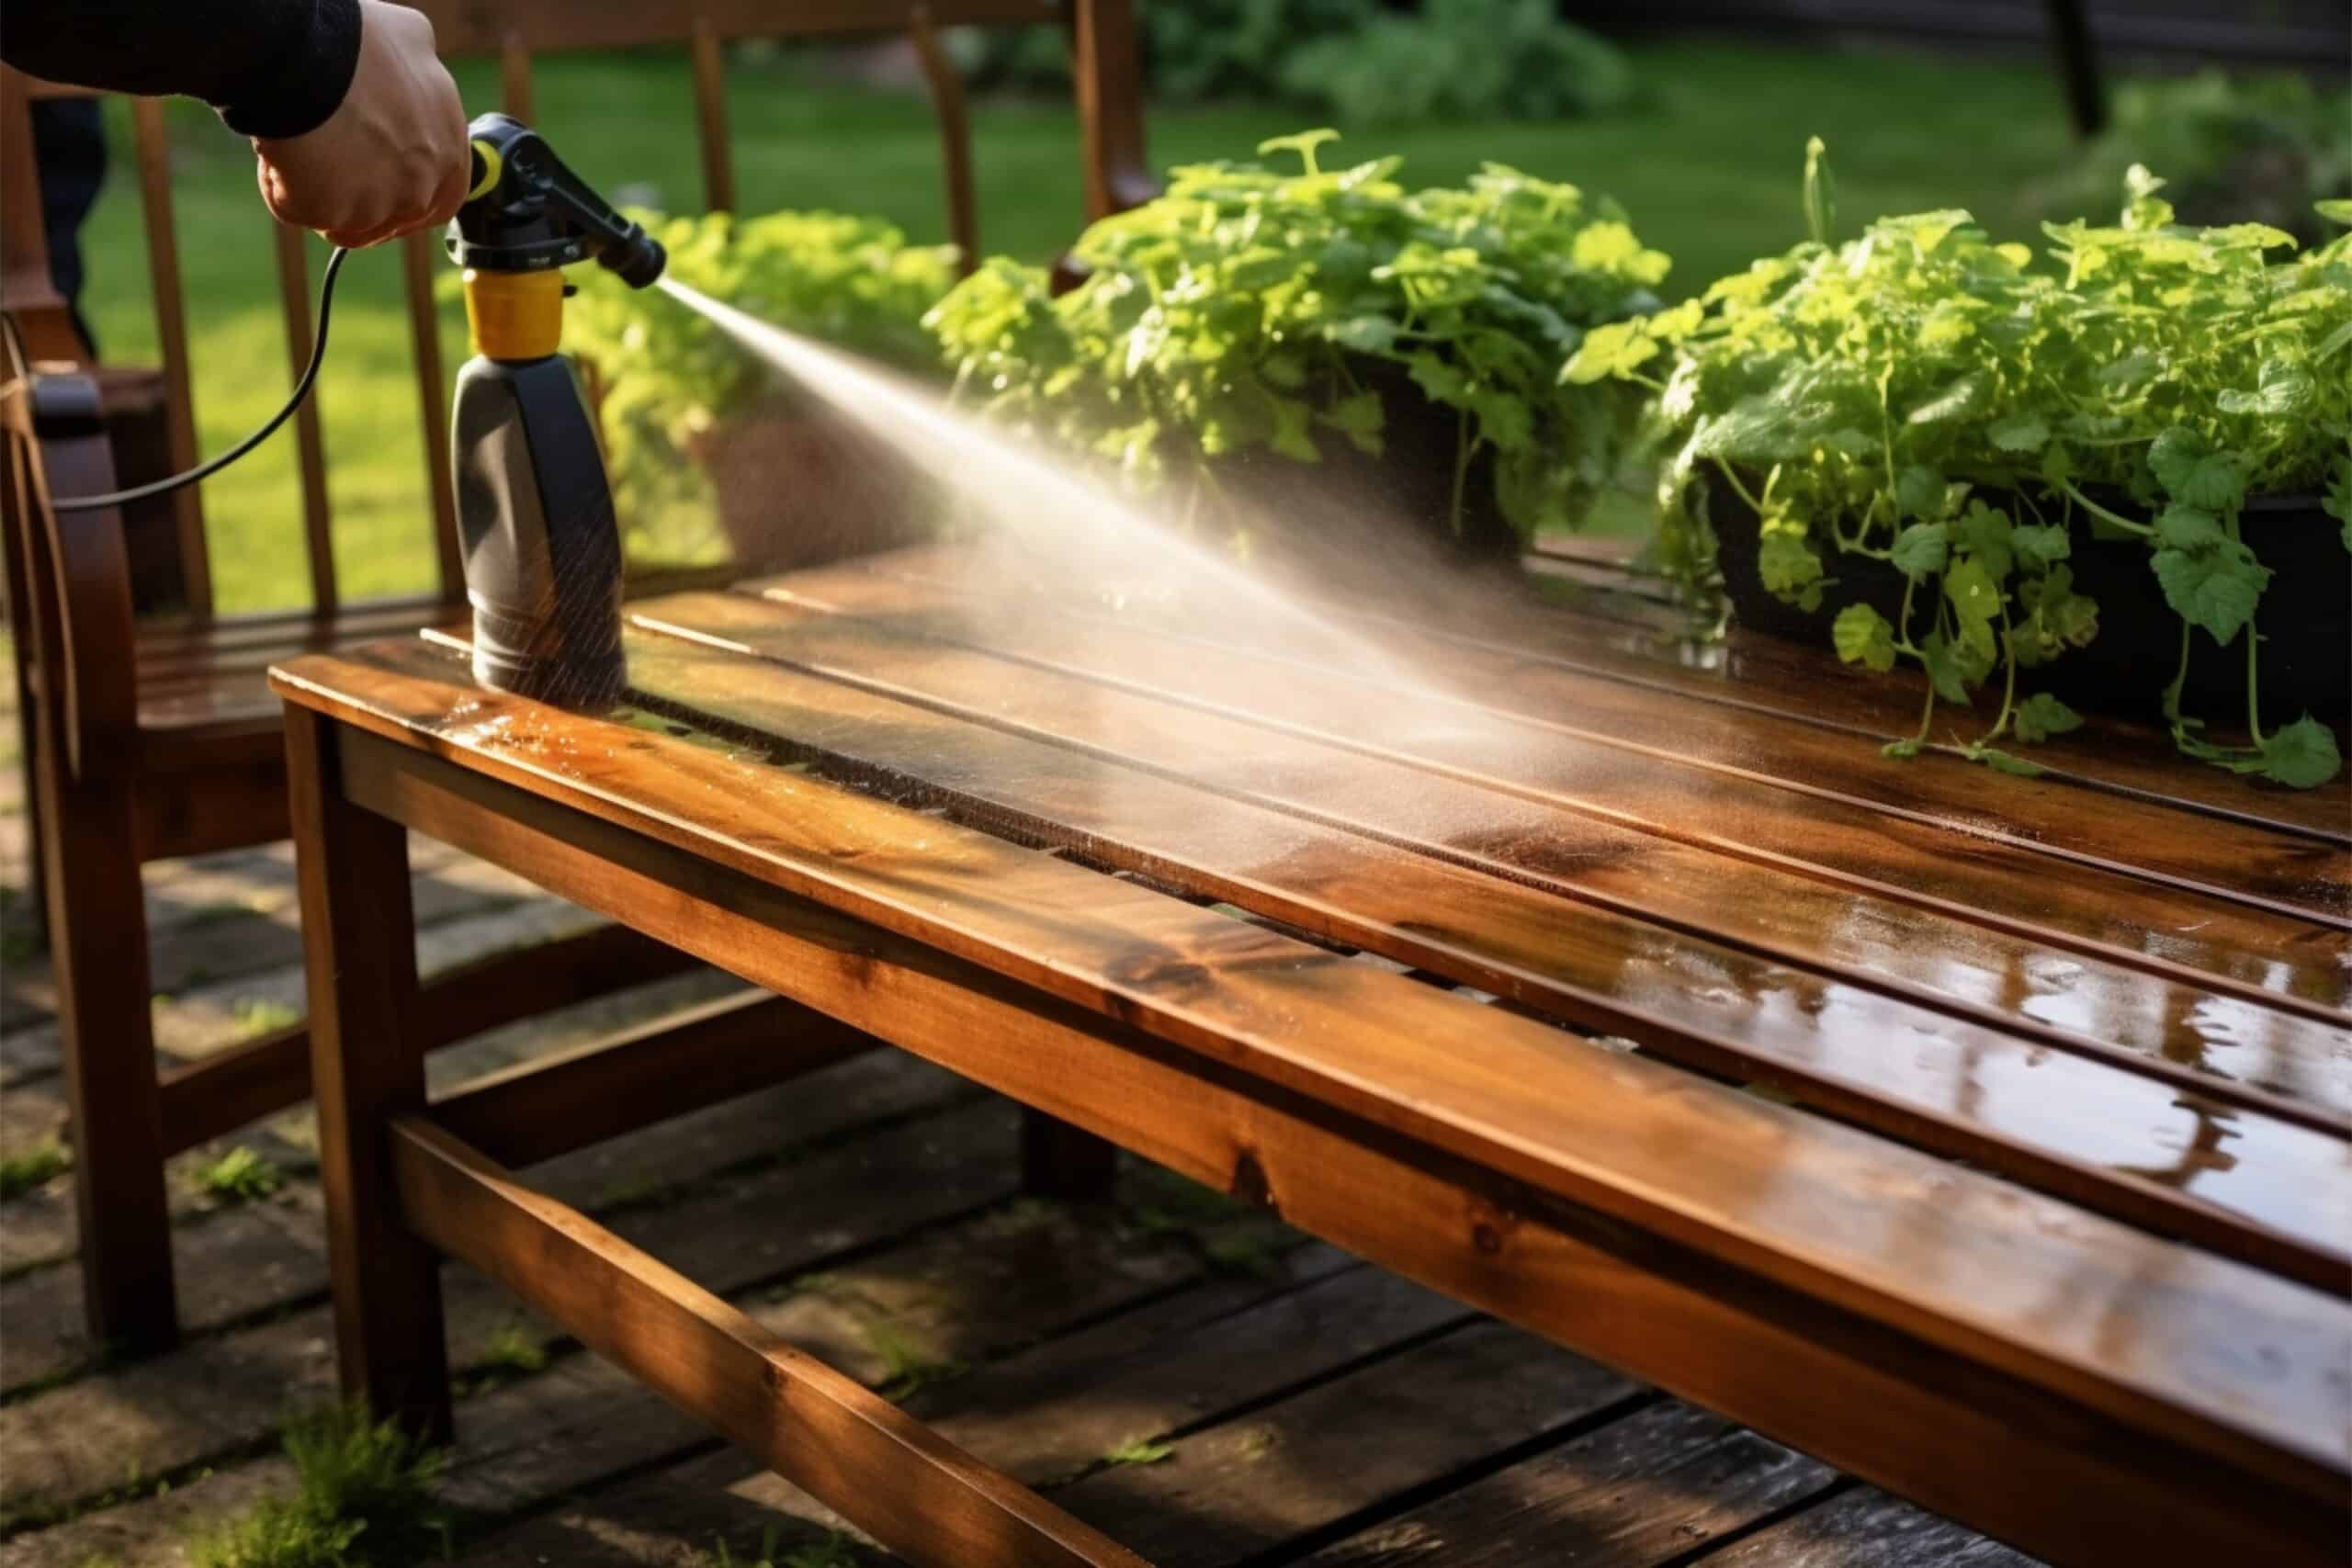 www.appr.com : How do I prevent the pressure washer from tipping over during use?